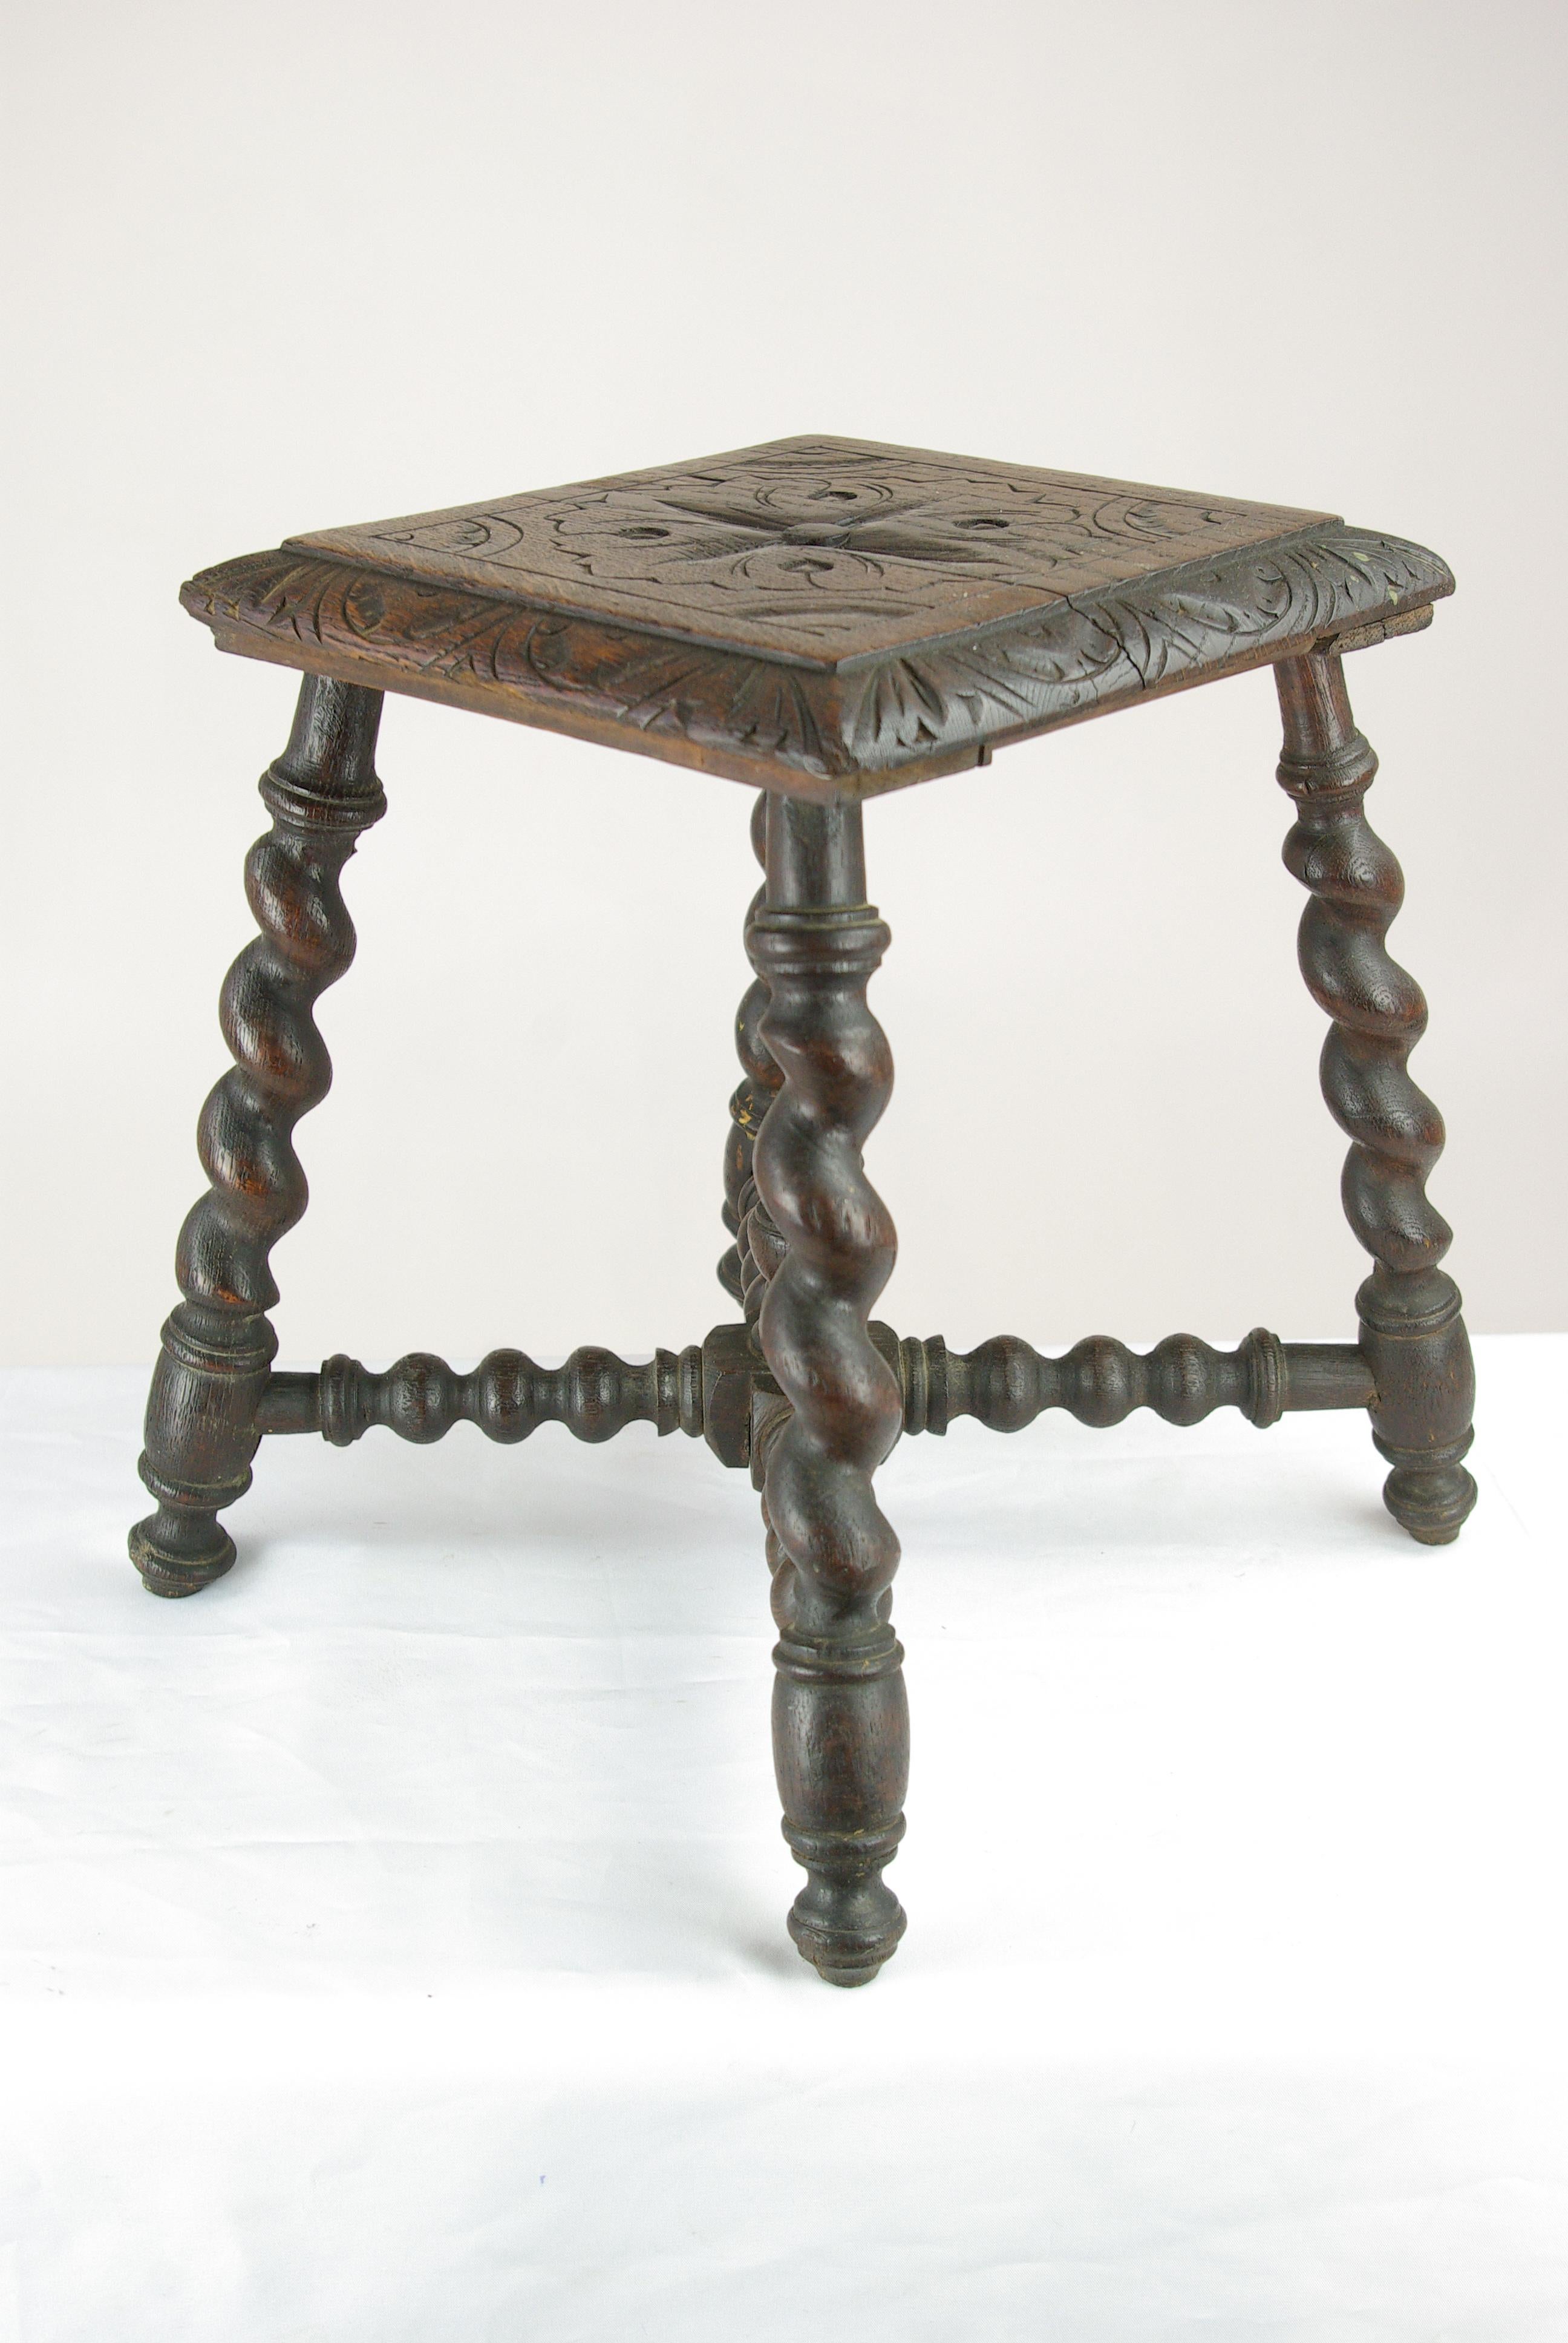 Antique stool, antique Victorian carved oak stool Barley twist stool, Antique Furniture, B1470.

Scotland, 1870s
Solid oak construction
Original dark oak finish
Thick beveled edge carved seat
Supported by four barley twist legs
Connected by